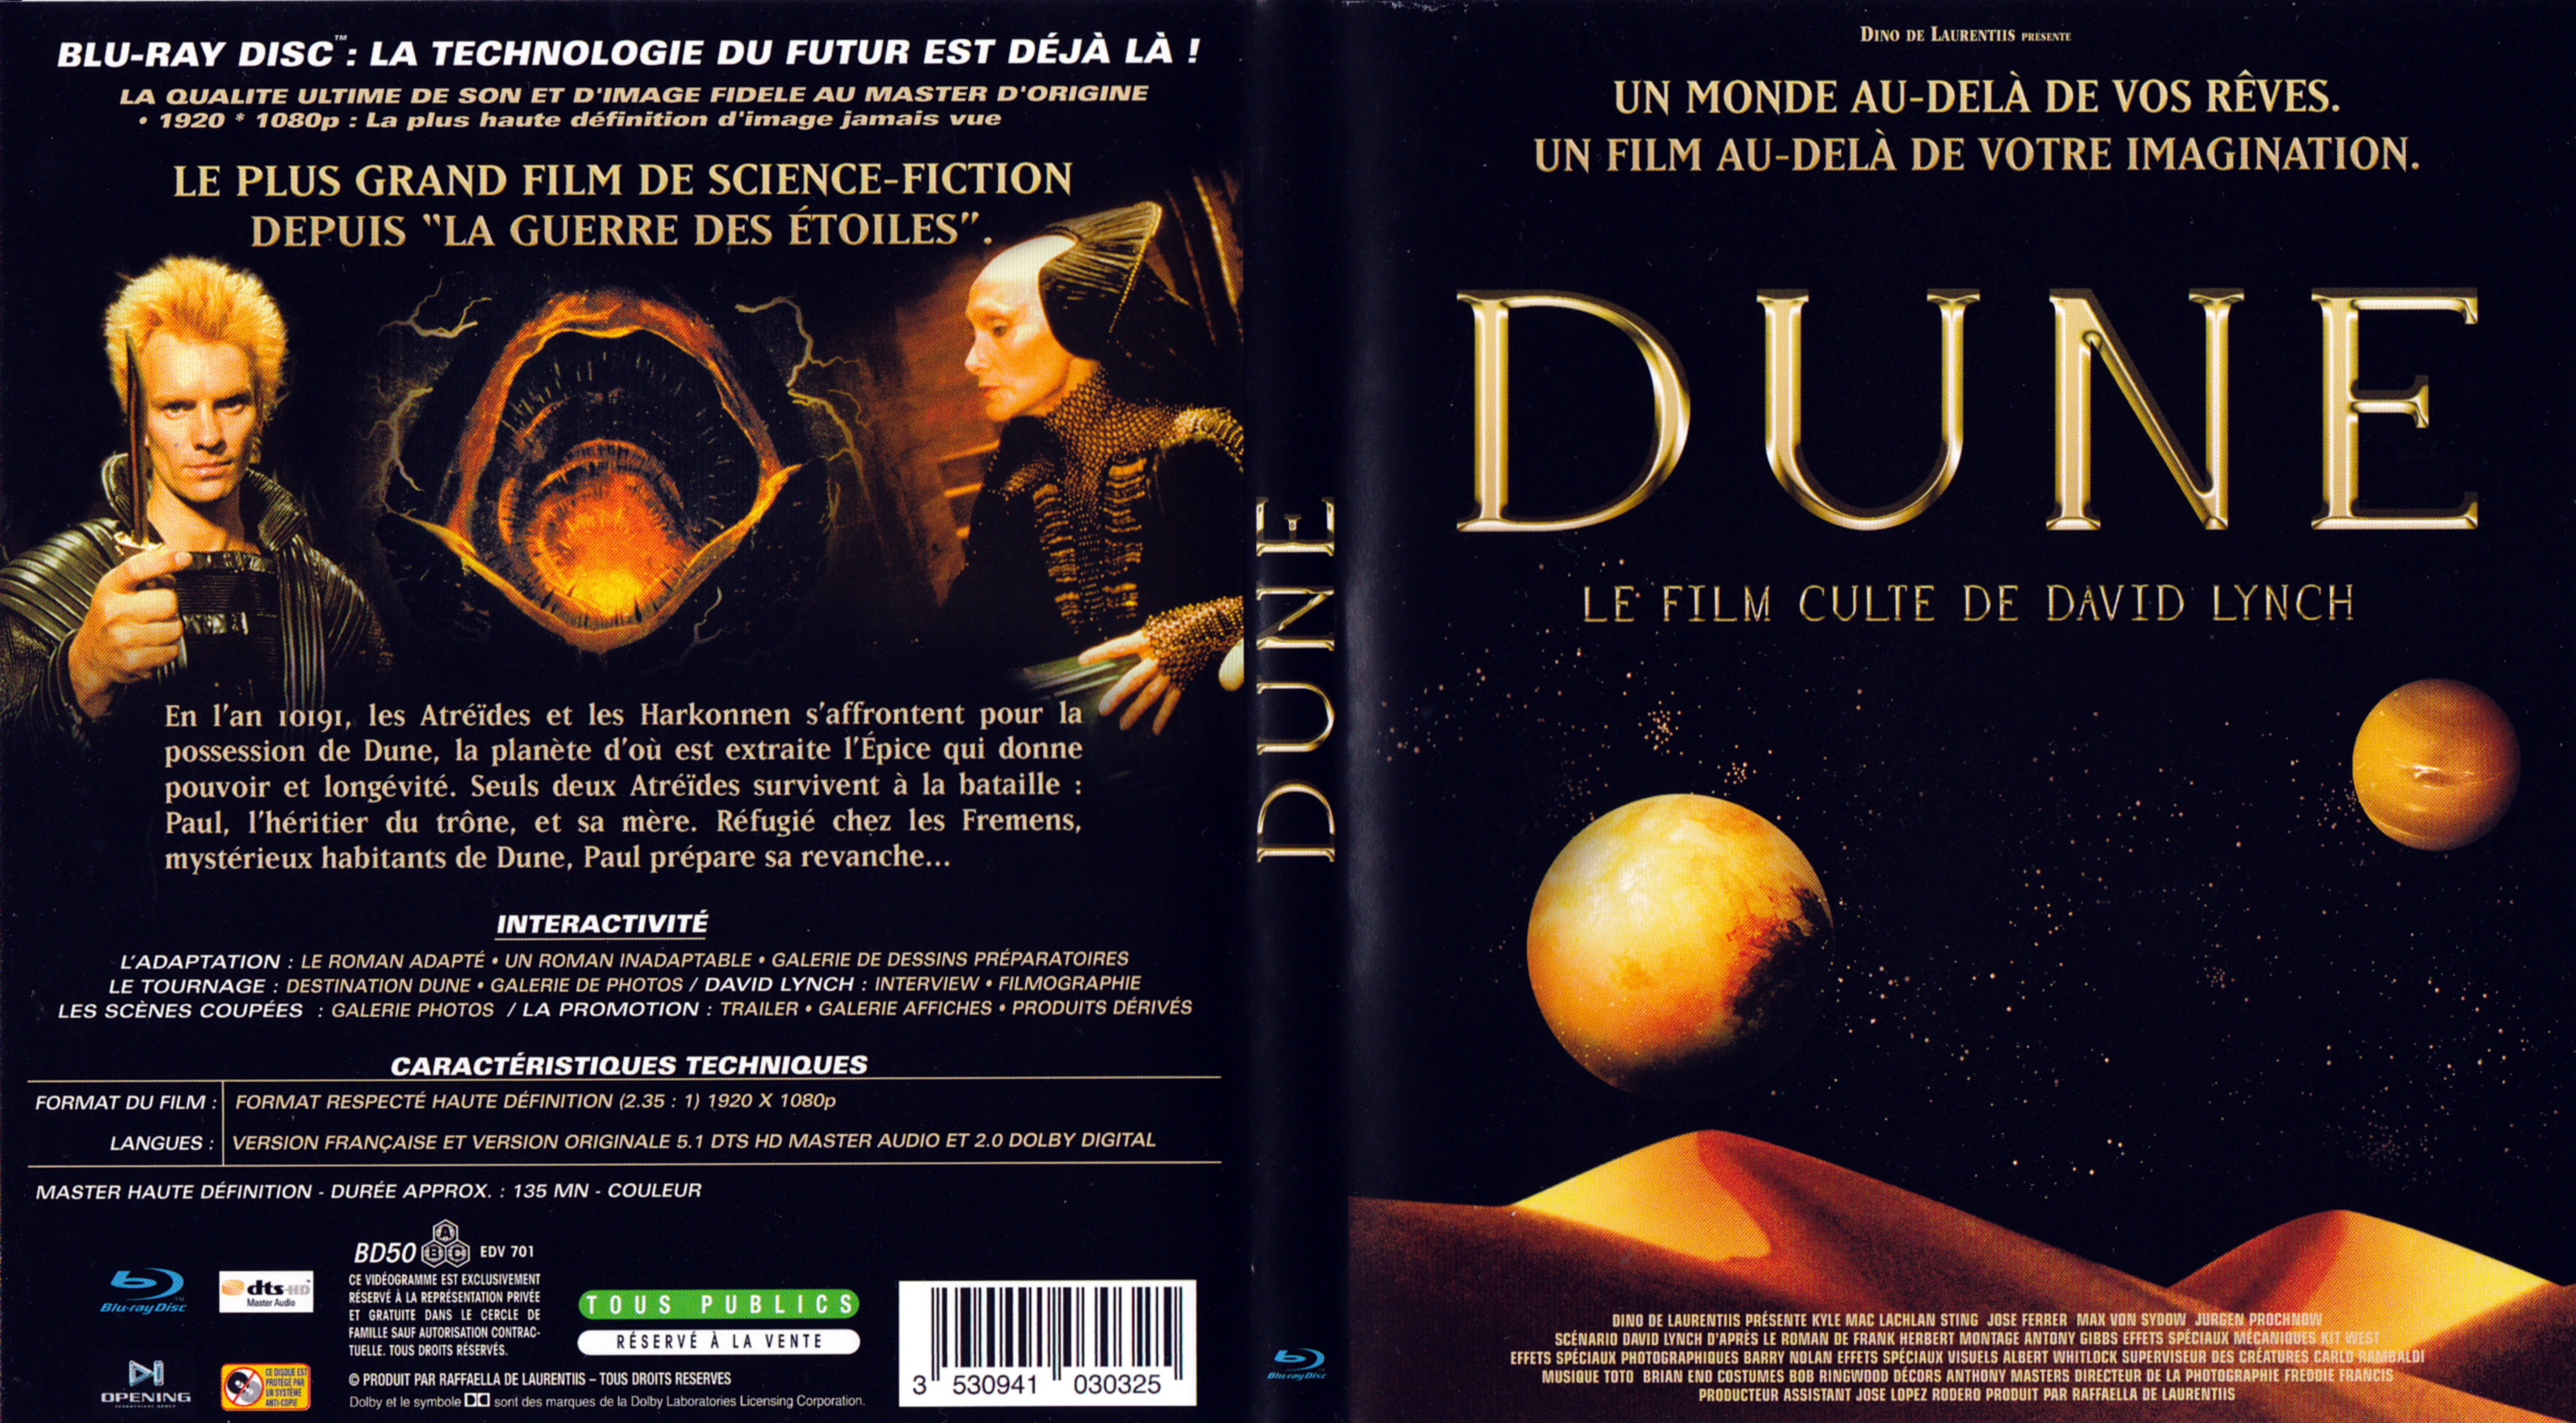 Jaquette DVD Dune (BLU-RAY)